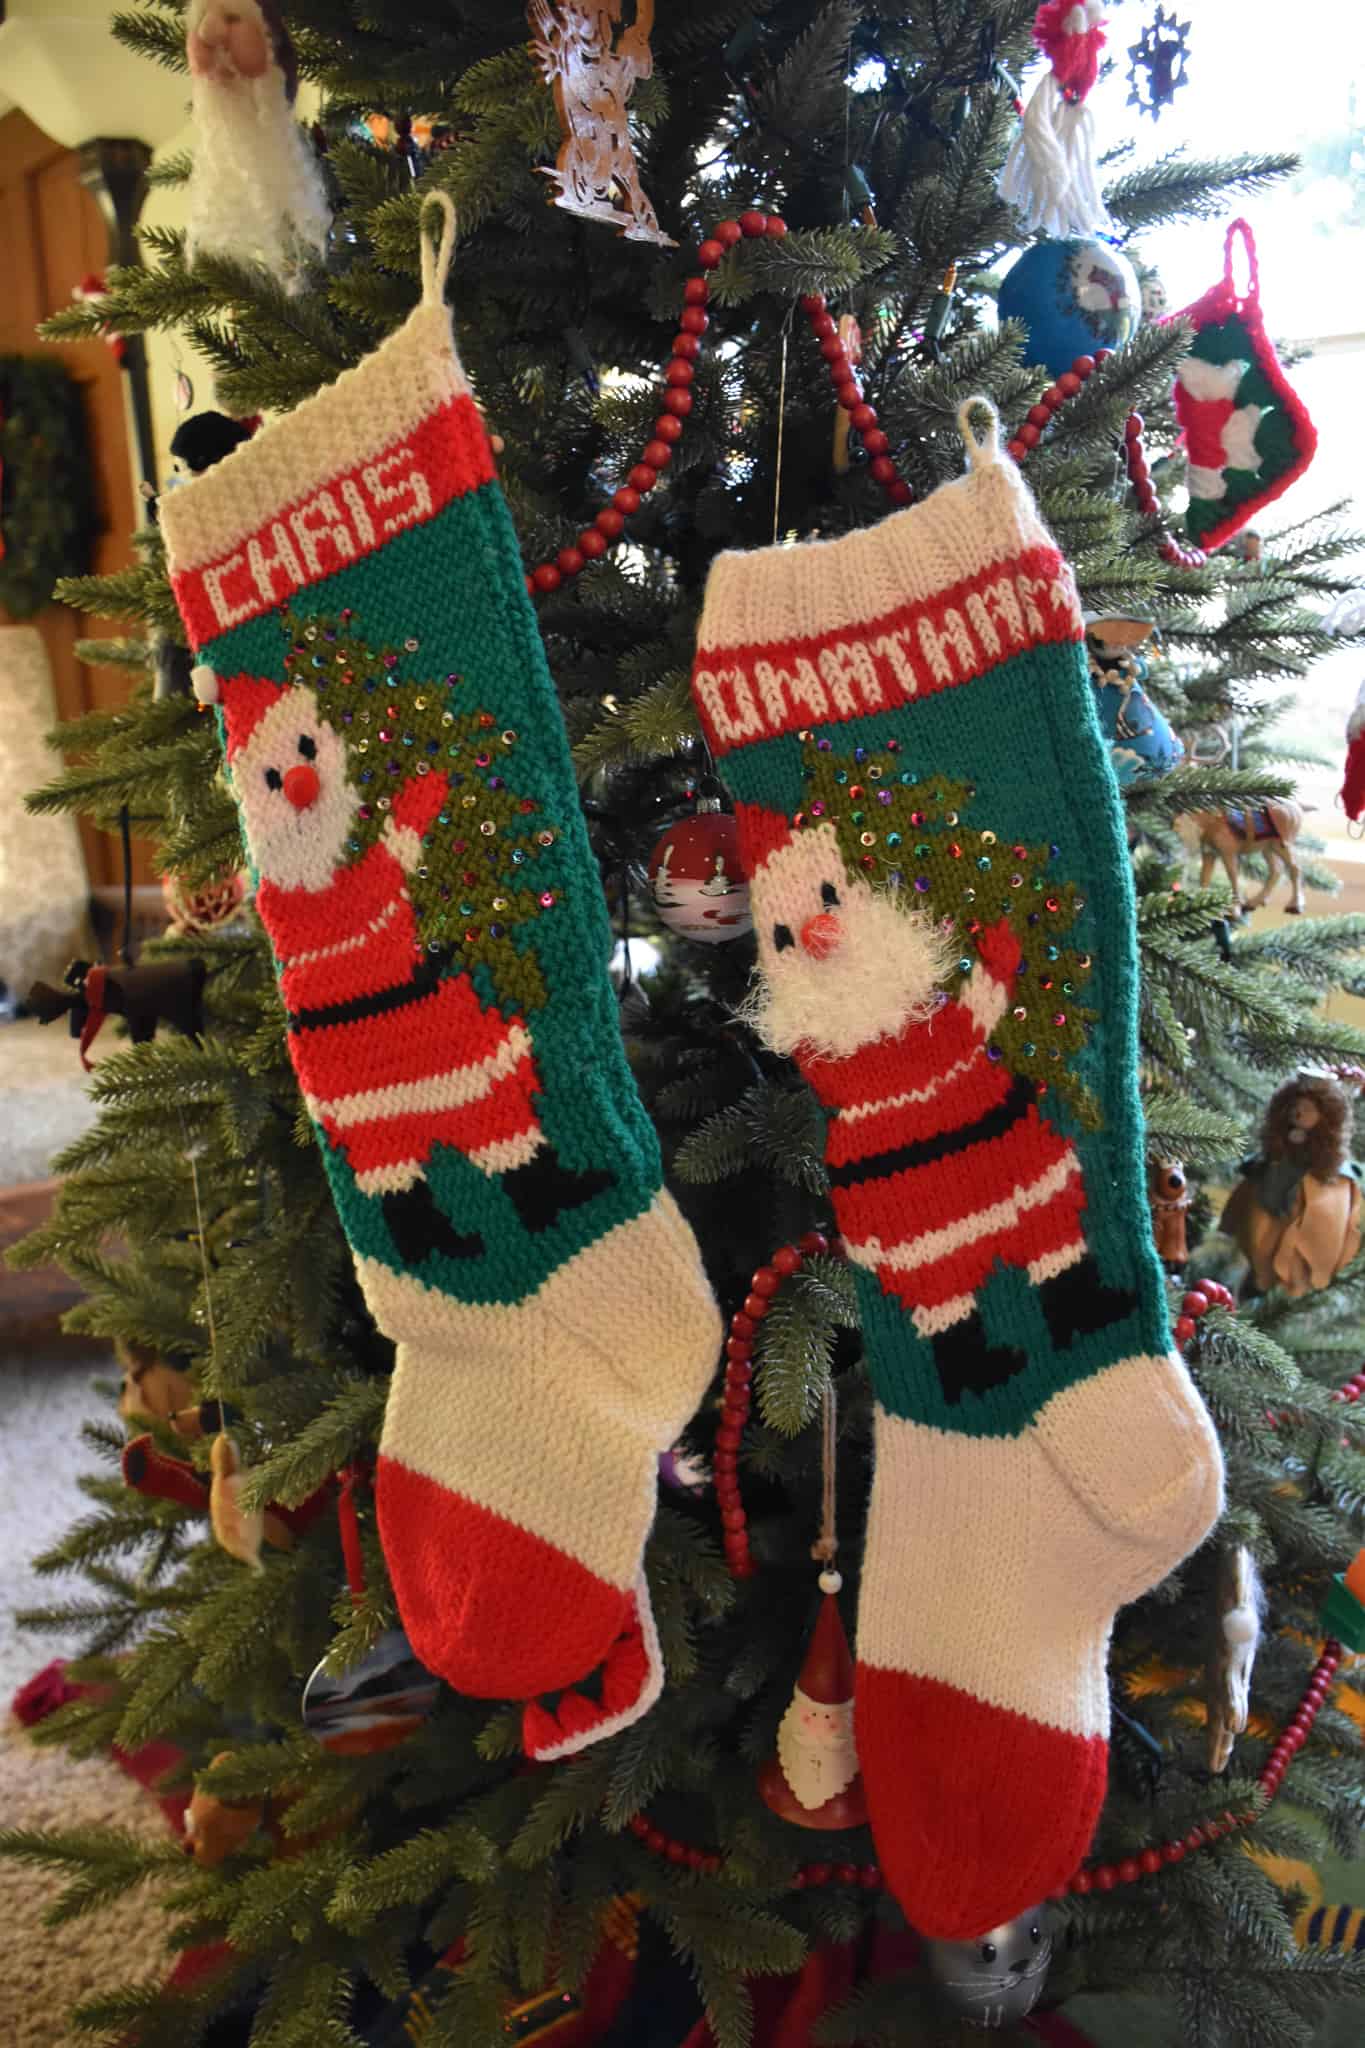 Green and red knitted Christmas stockings with Santa Claus.